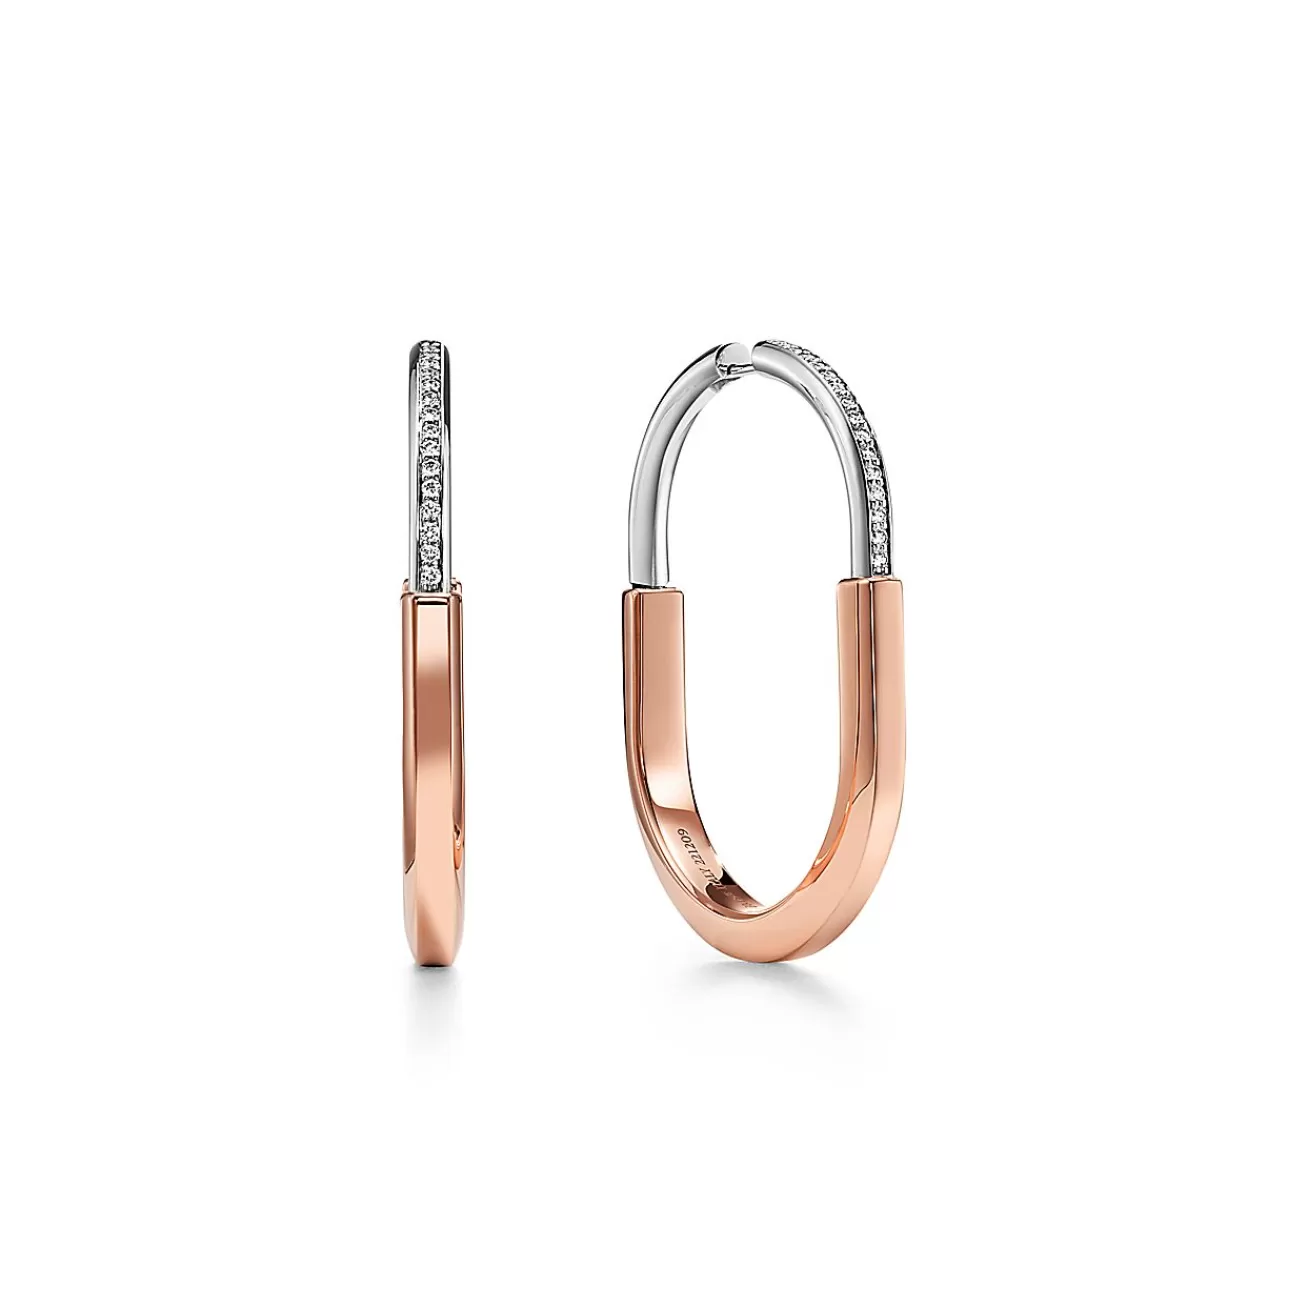 Tiffany & Co. Tiffany Lock Earrings in Rose and White Gold with Diamonds, Extra Large | ^ Earrings | Hoop Earrings